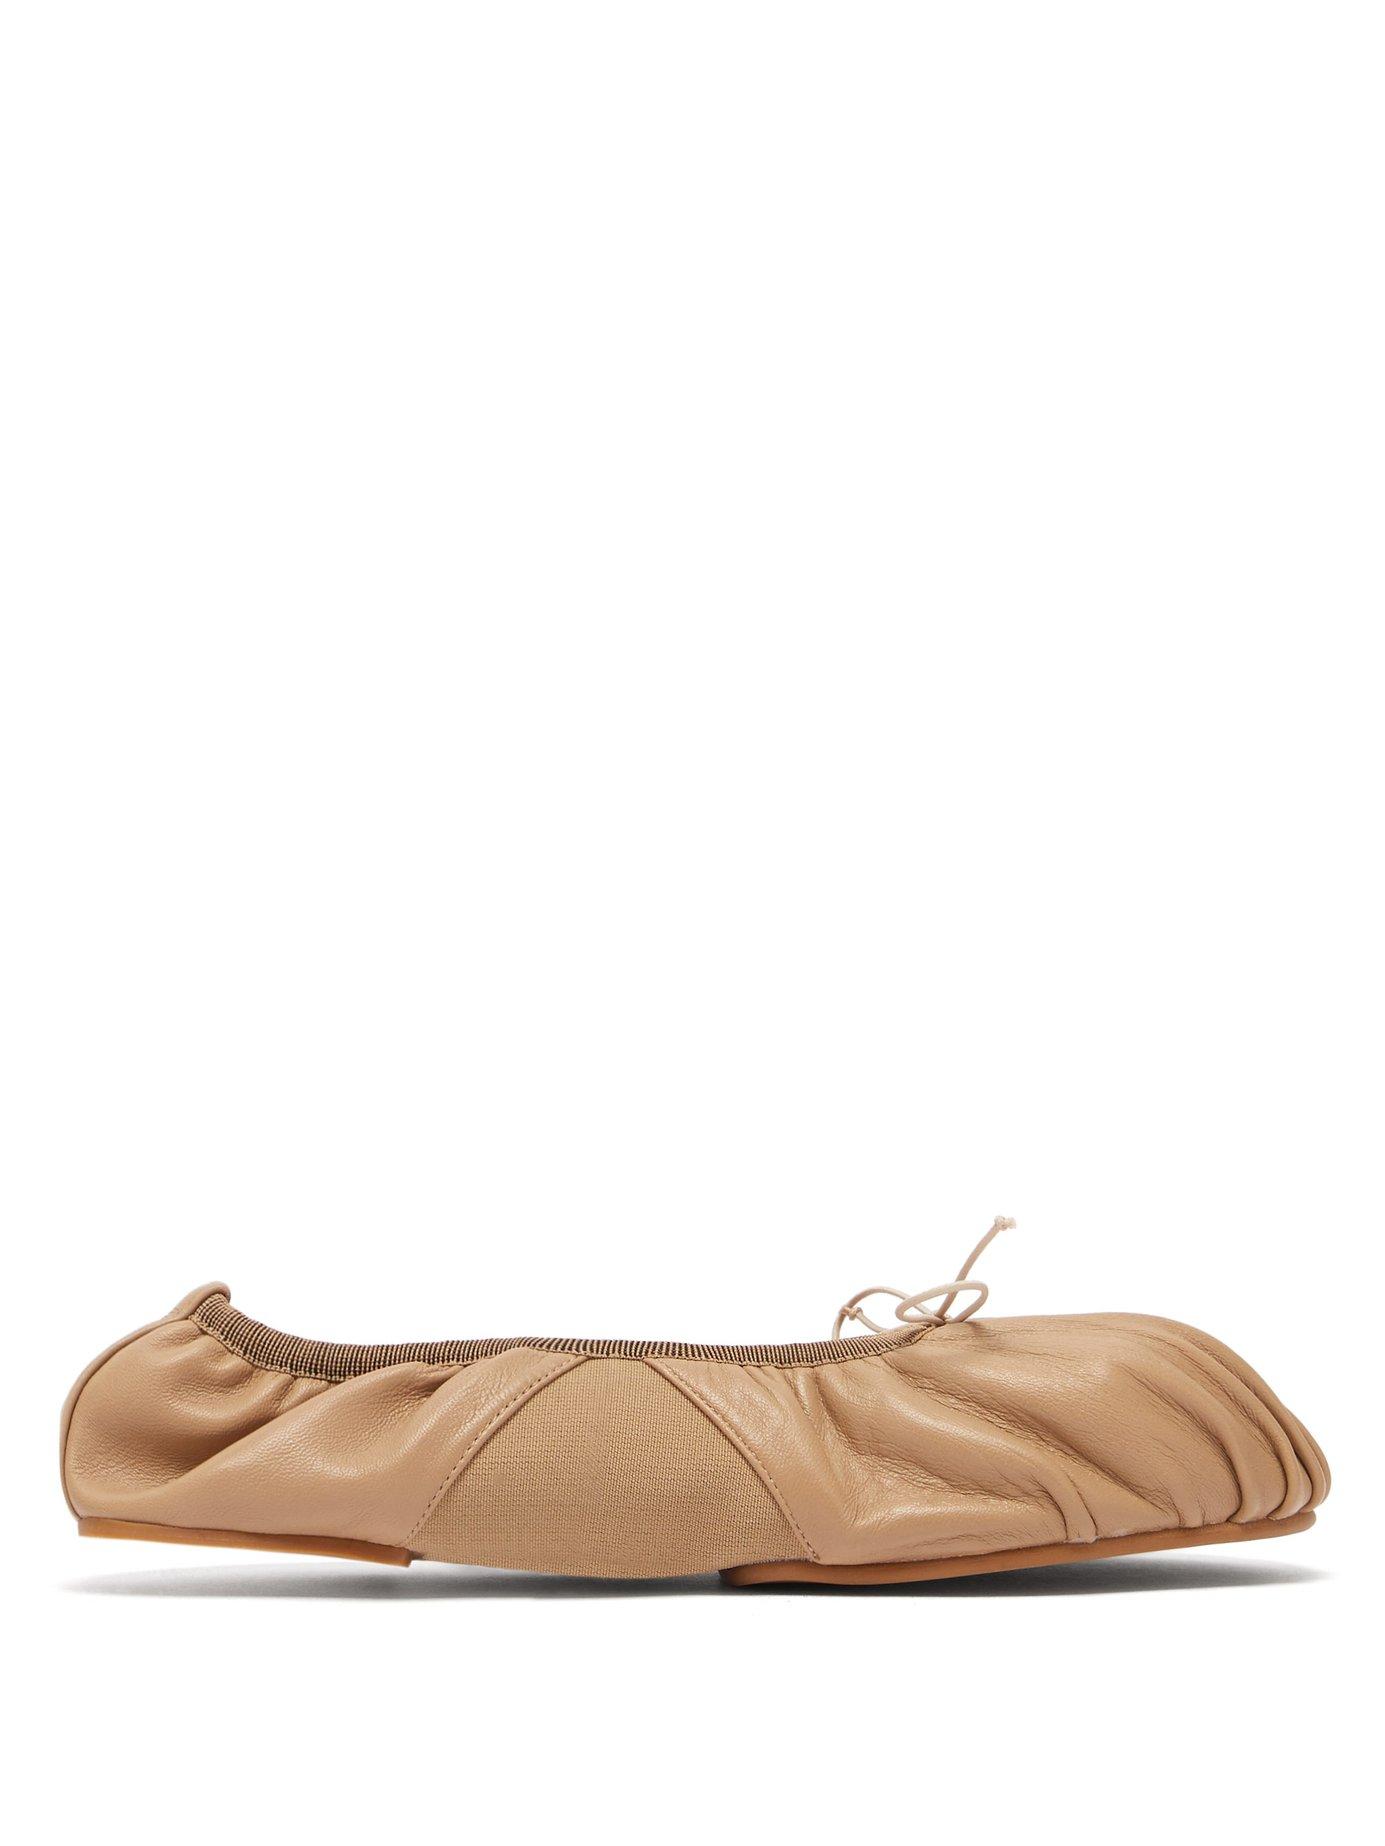 Acne Studios Ruched Leather Ballet Flats in Natural | Lyst